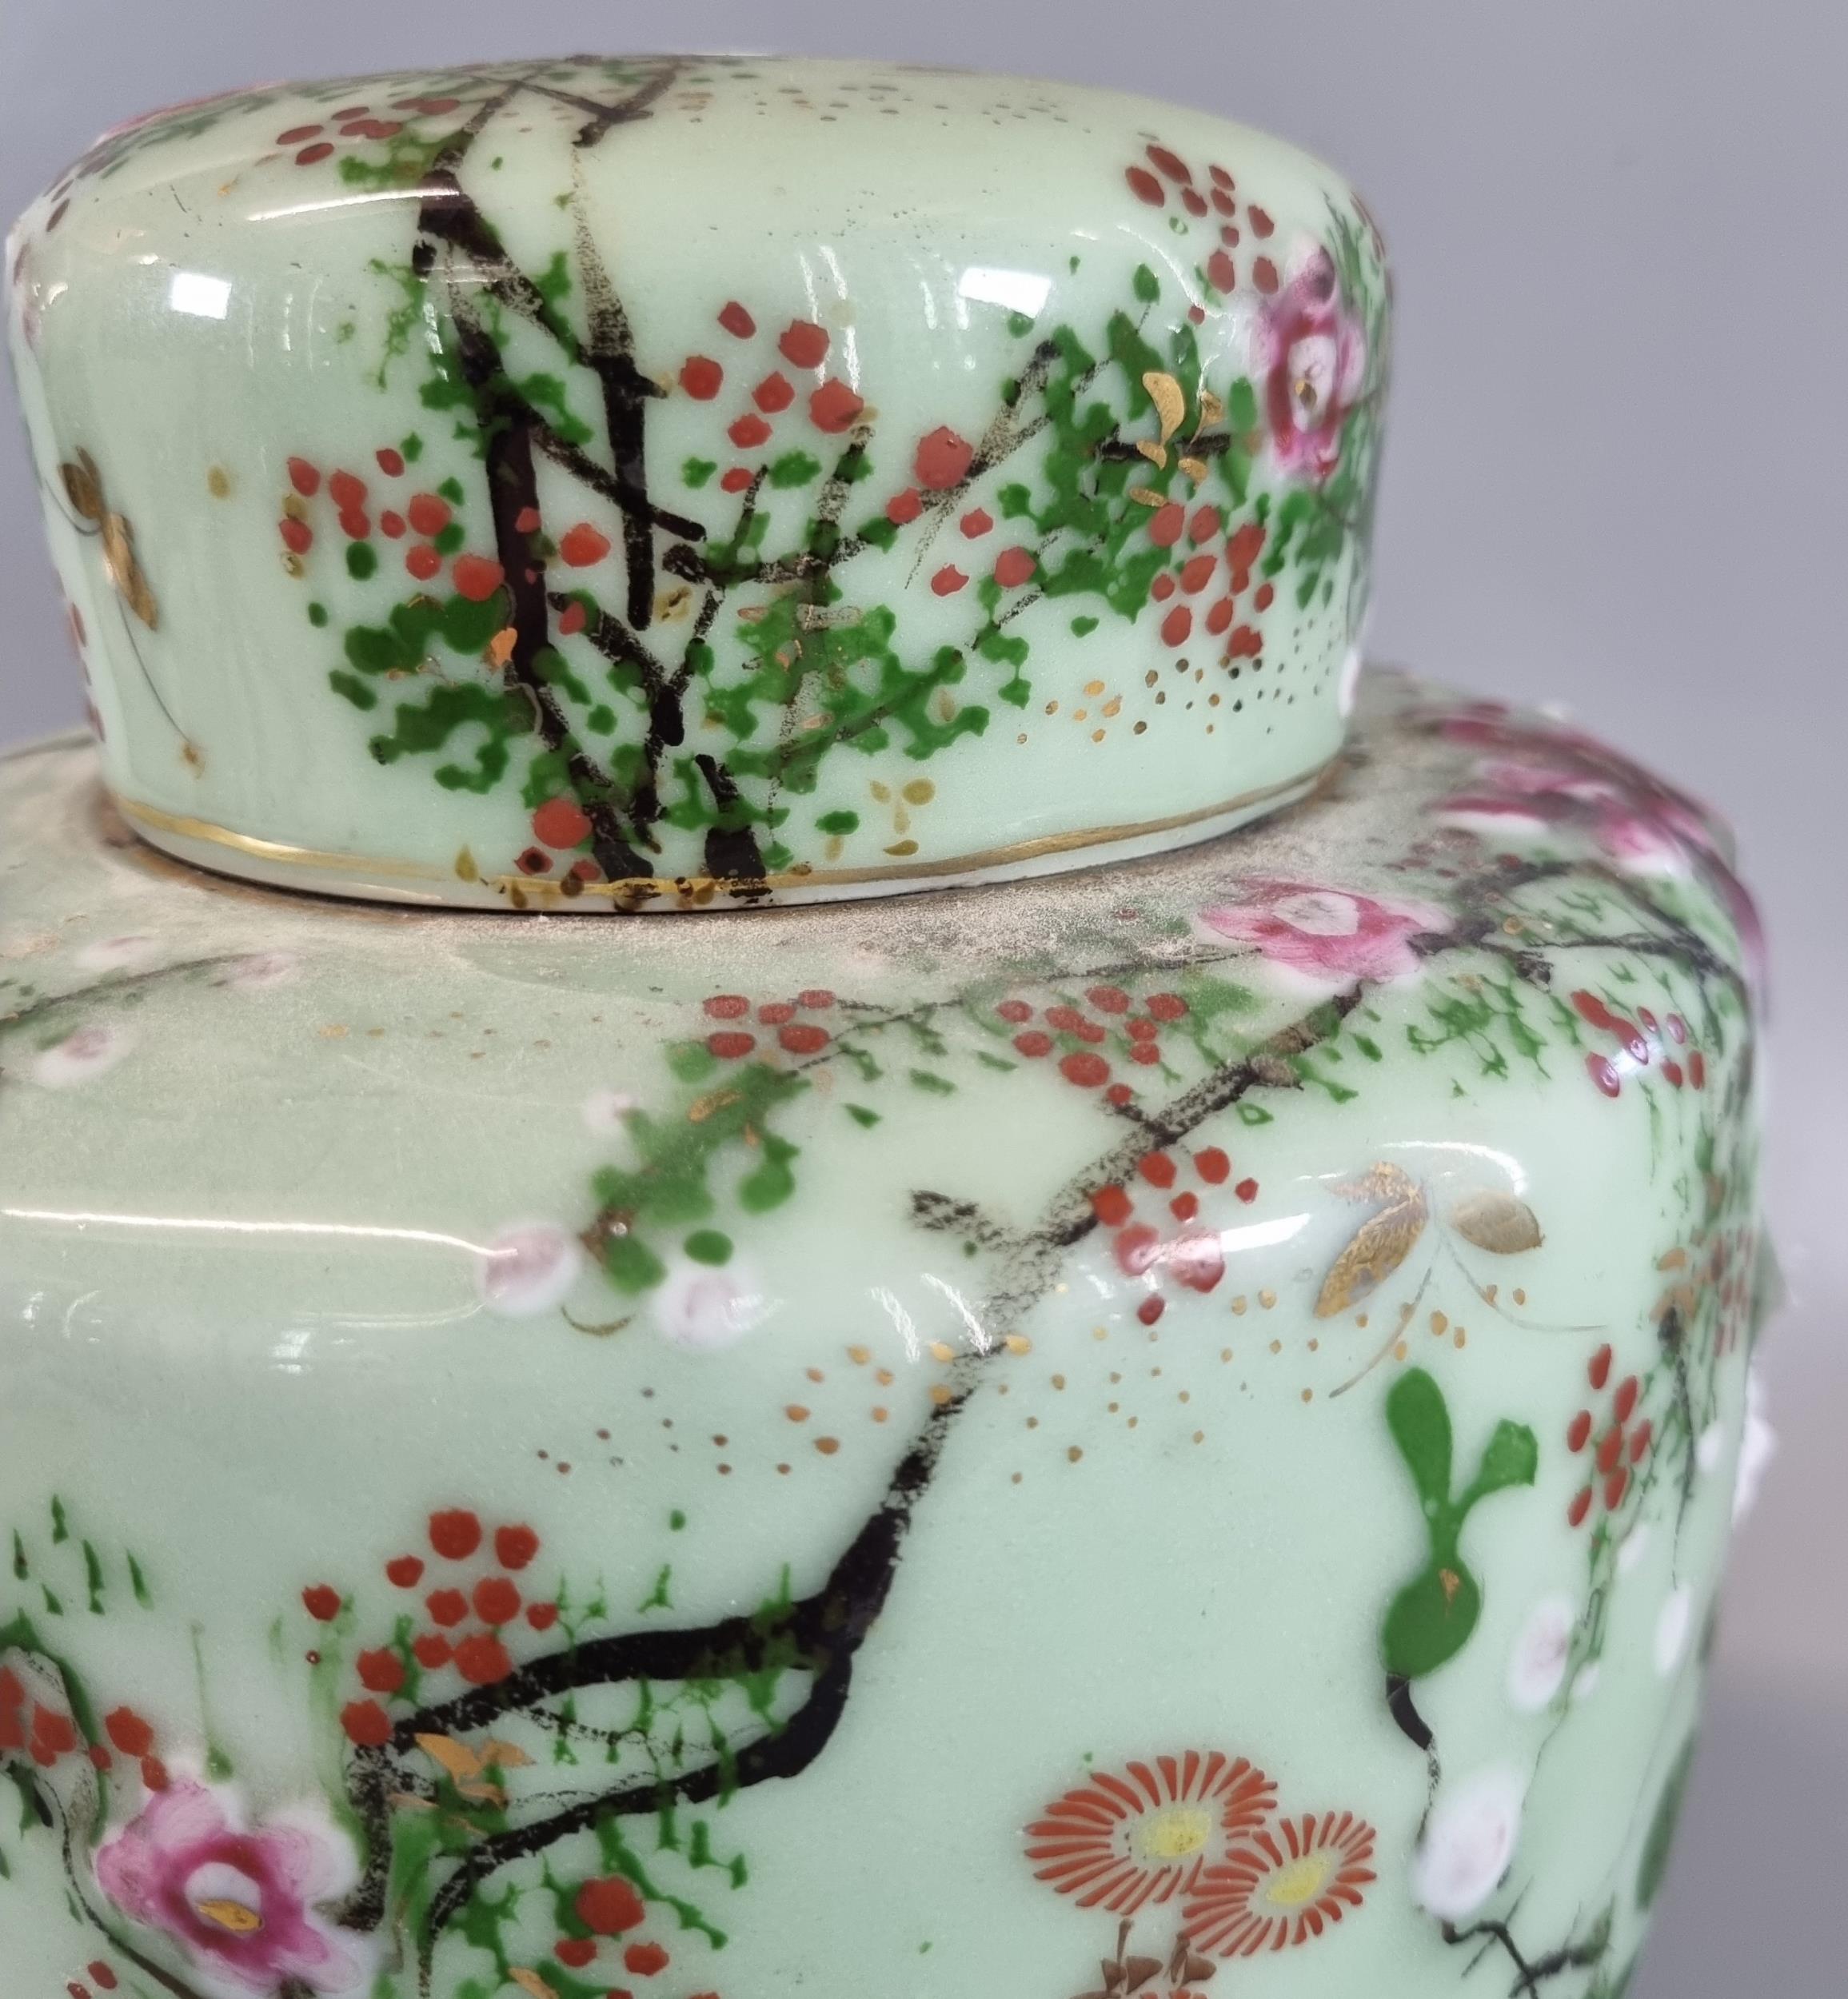 Japanese export, polychrome on celadon ground 'Seto' jar and cover, decorated with prunus flowers, - Image 2 of 2